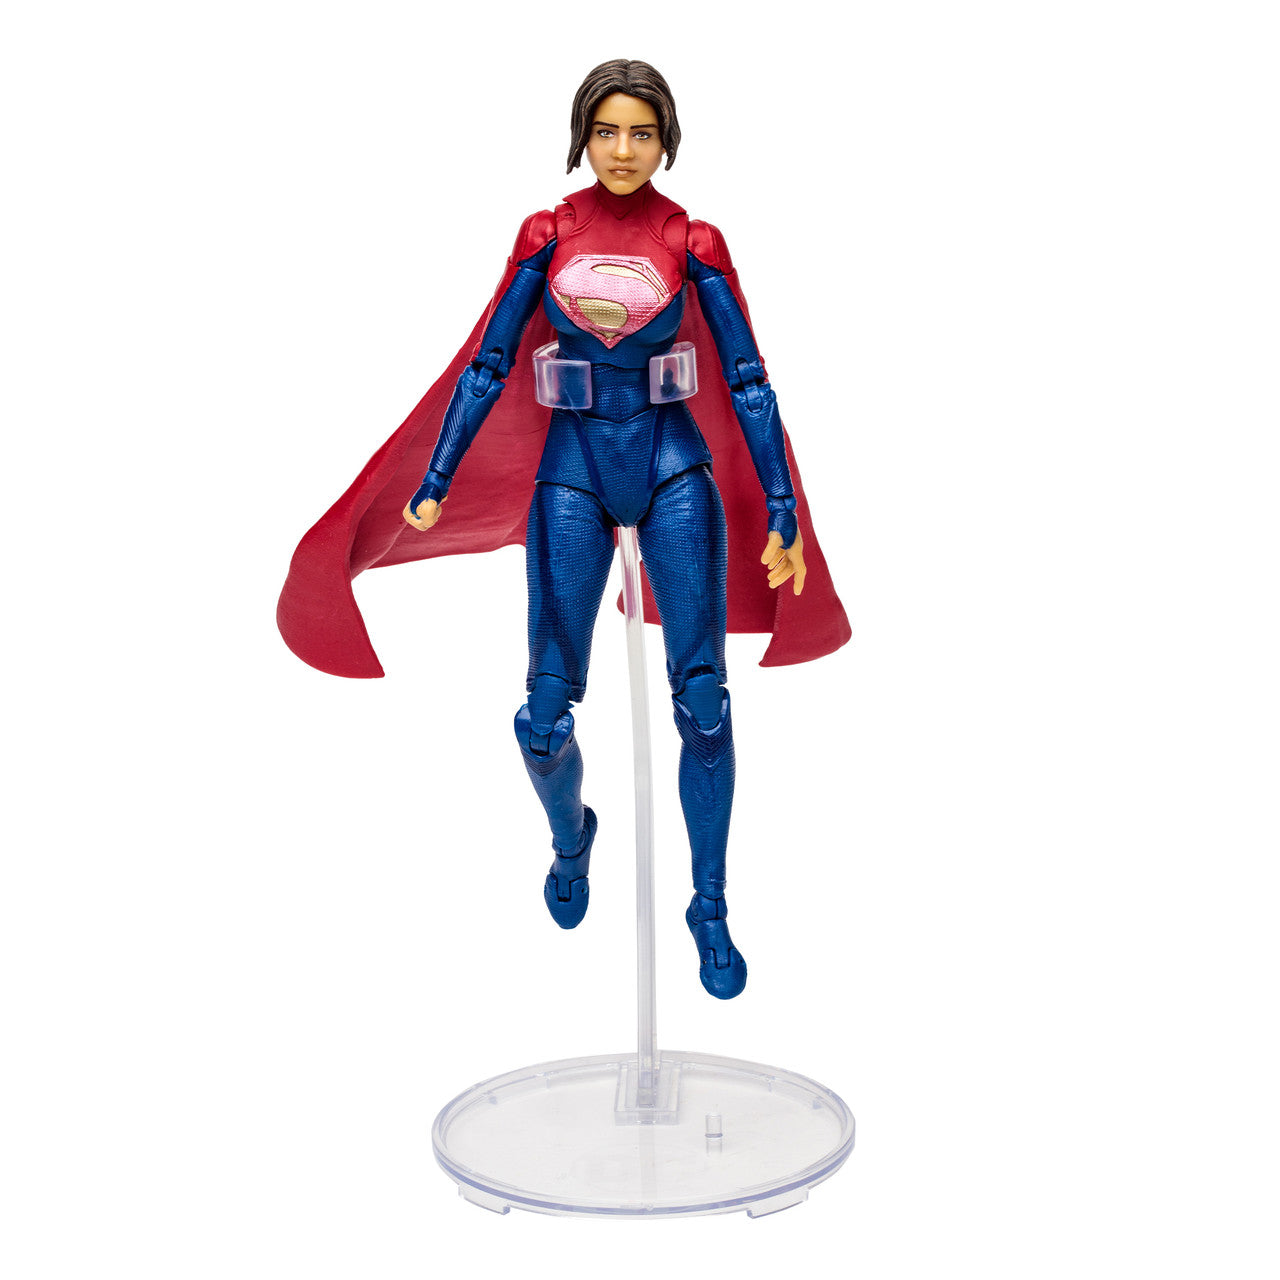 Supergirl (The Flash Movie) 7" Figure By Mcfarlane